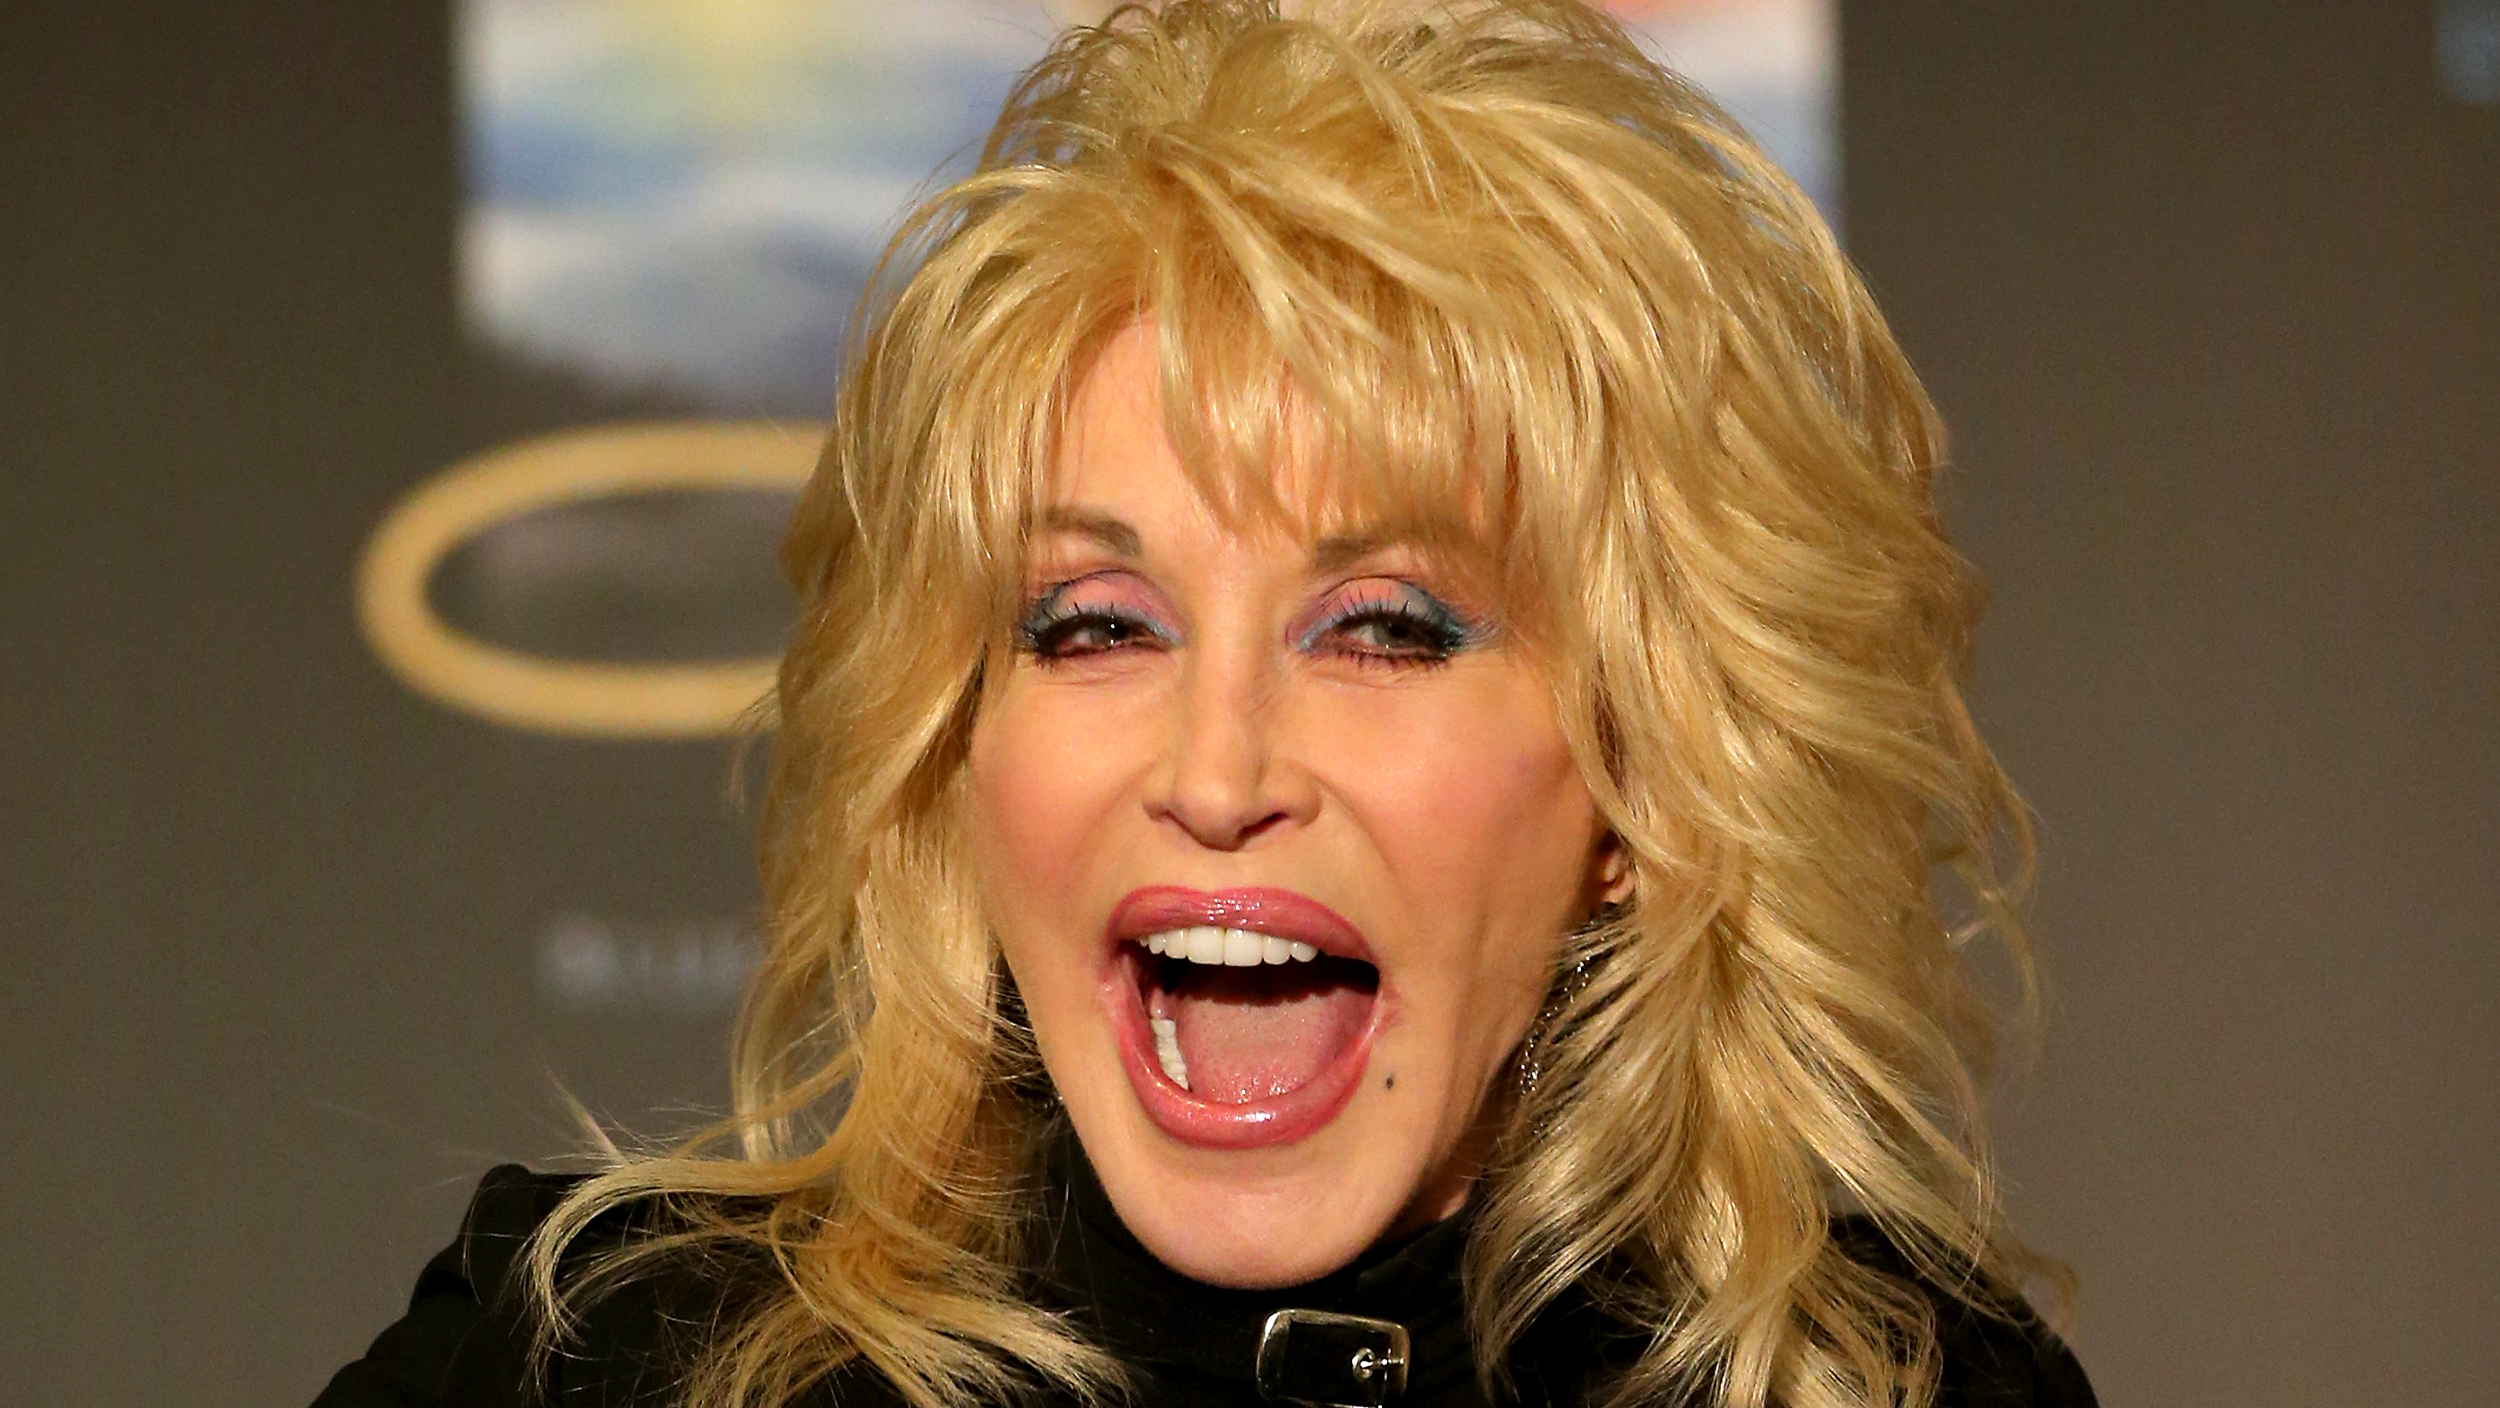 5 style lessons we can learn from Dolly Parton - TODAY.com